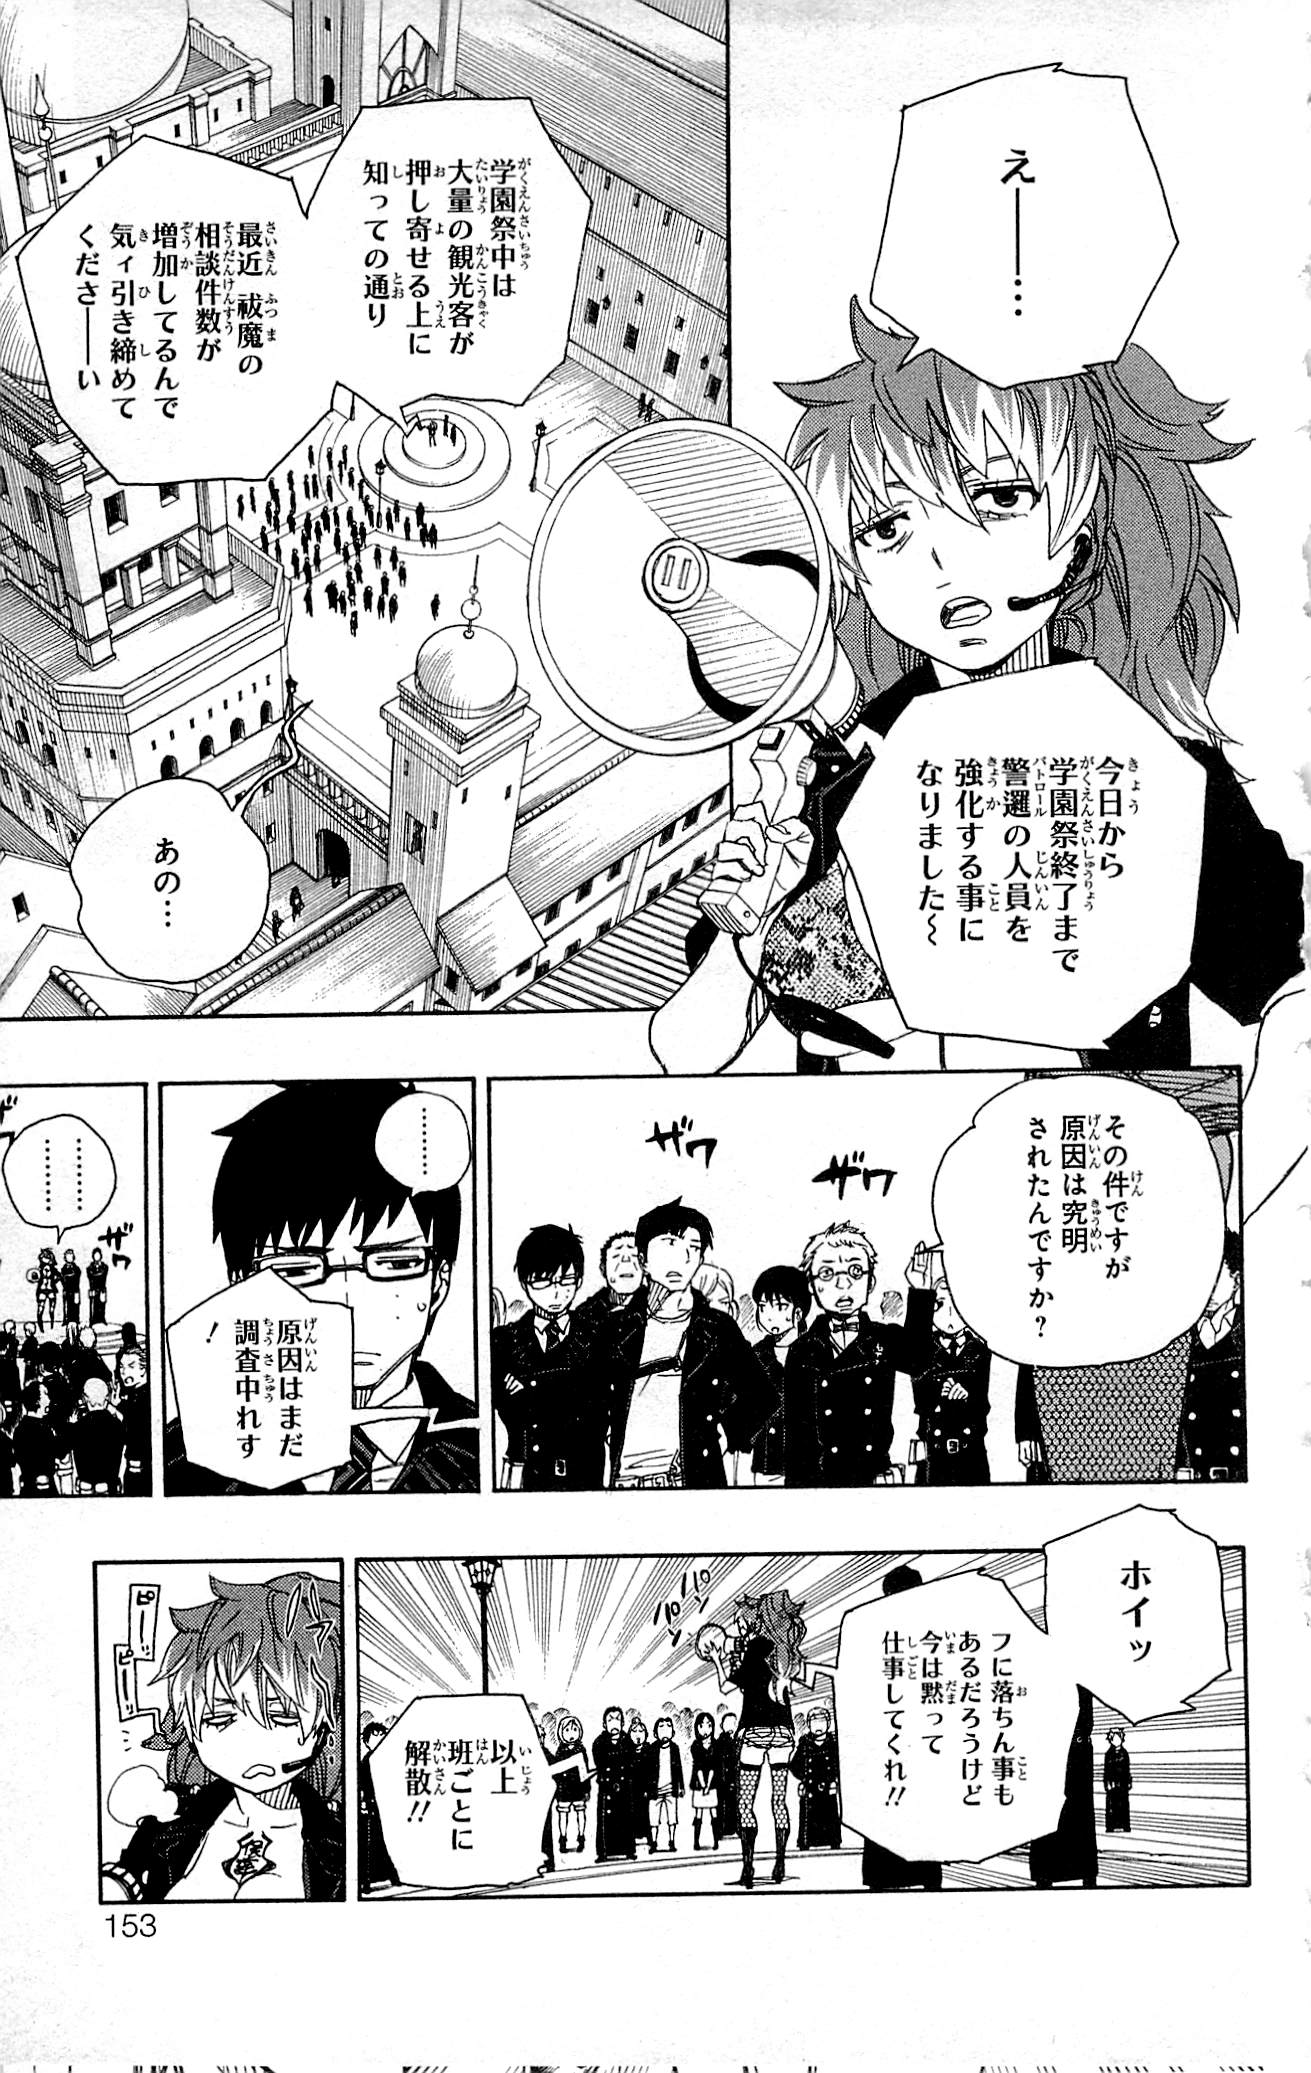 Ao no Exorcist - Chapter 47 - Page 2